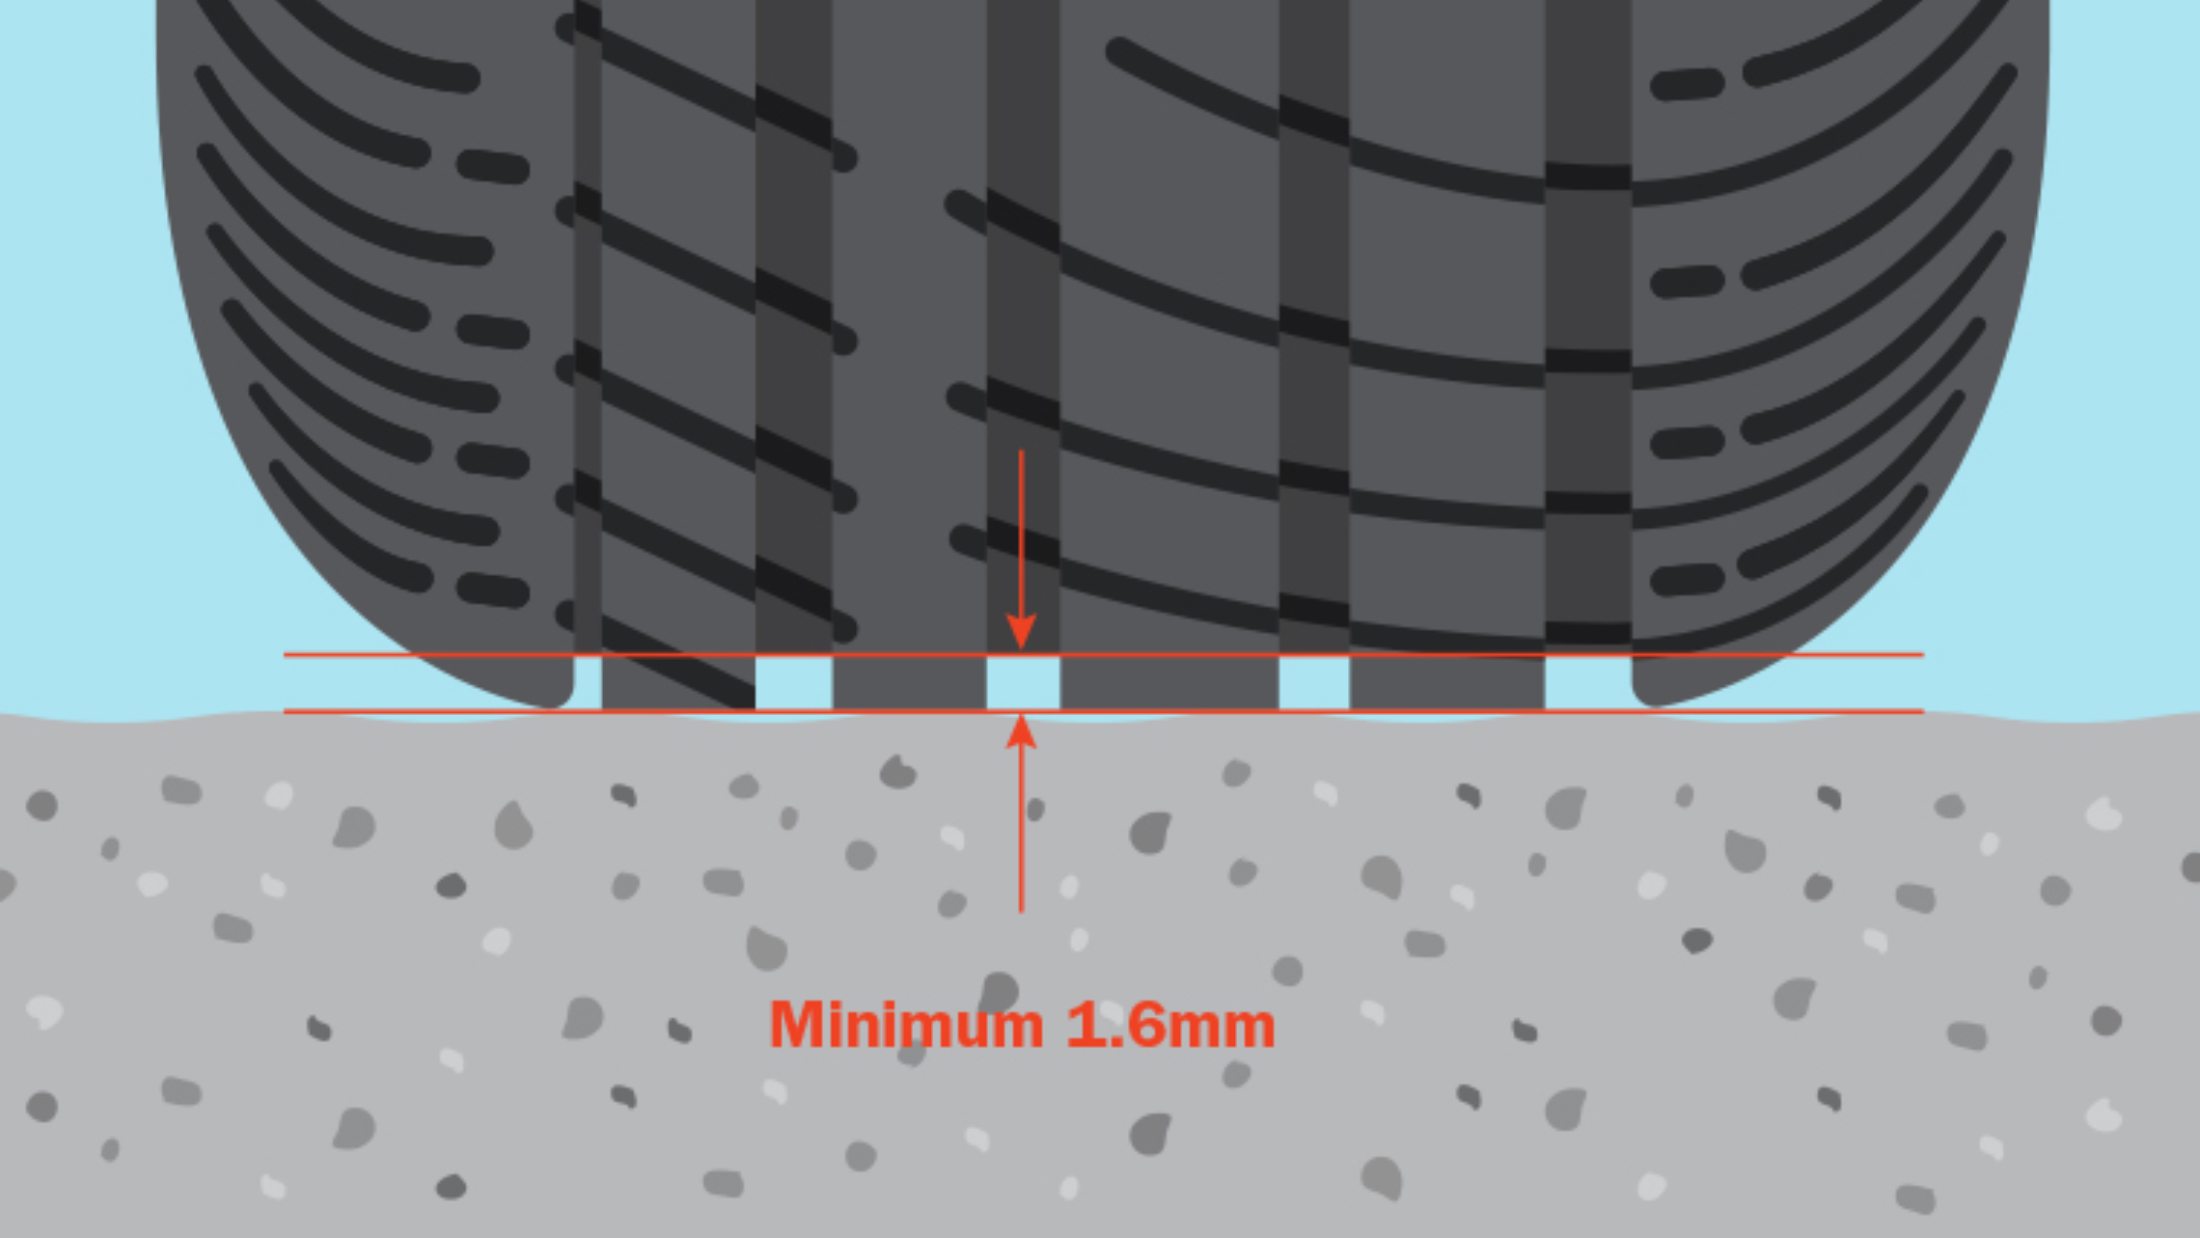 Make sure that you're within the legal minimum tread depth limit of 1.6mm